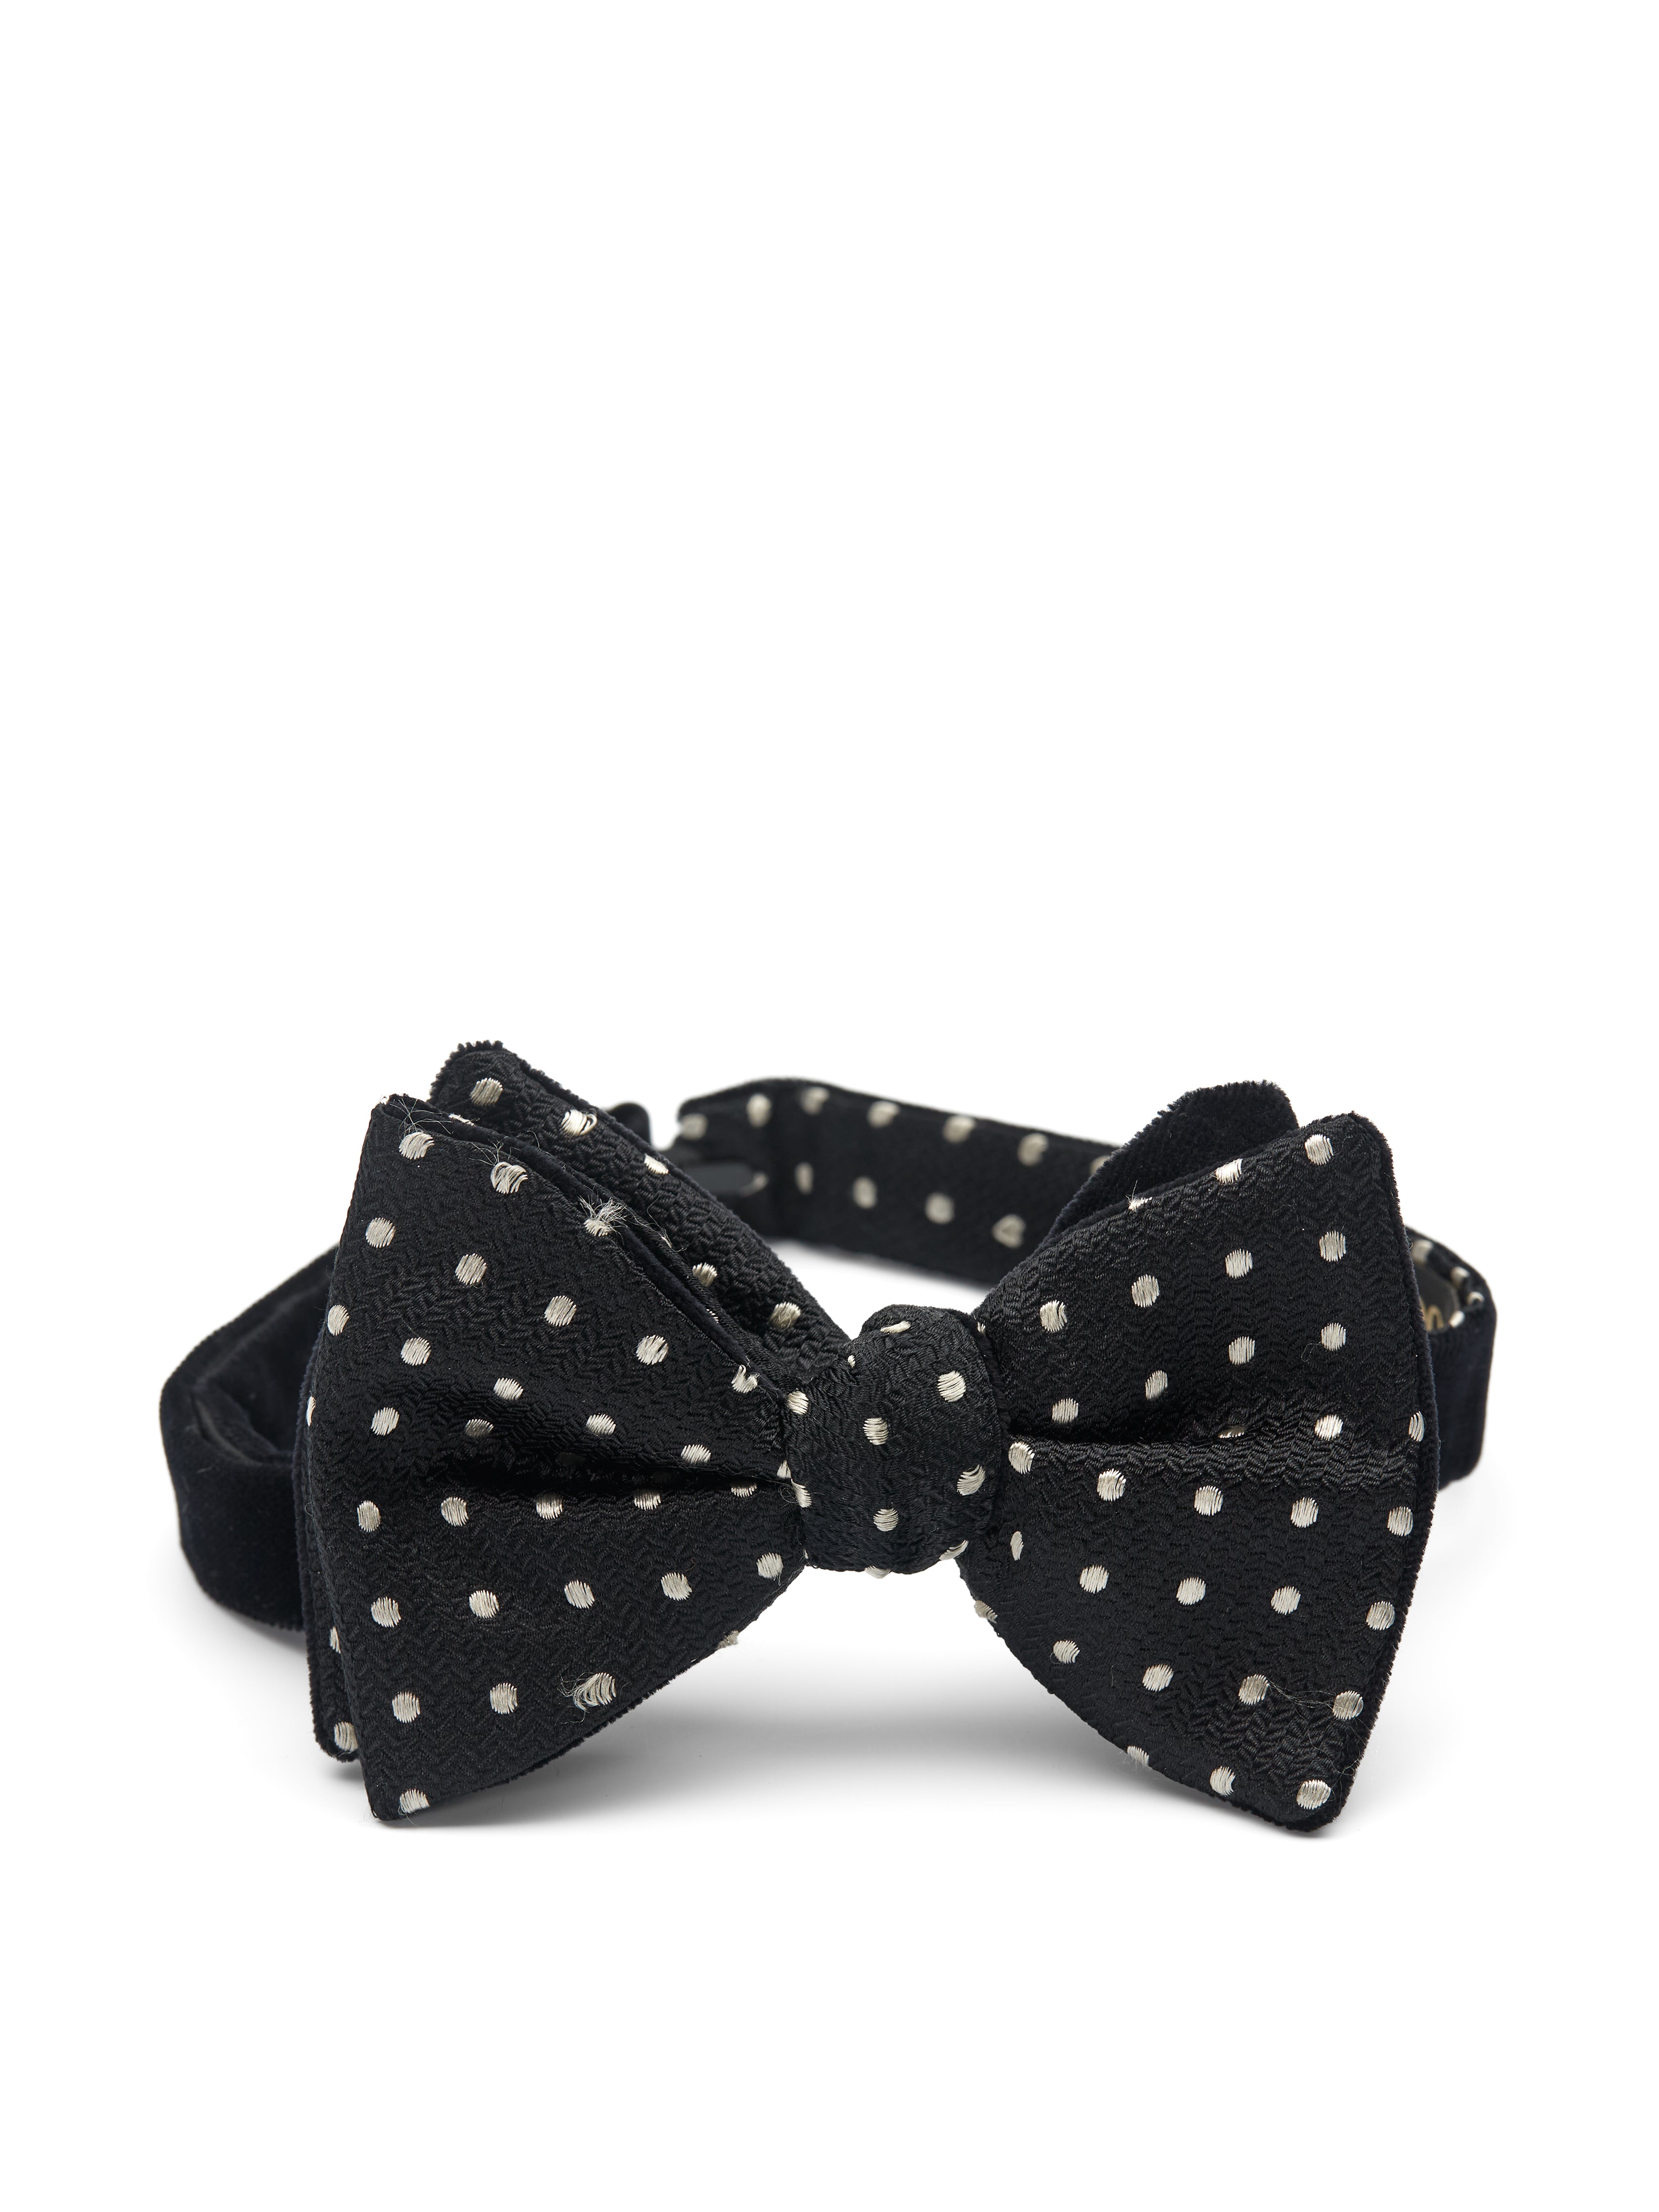 Black Velvet with Black Pickwick Contrast Large Party Bow Tie